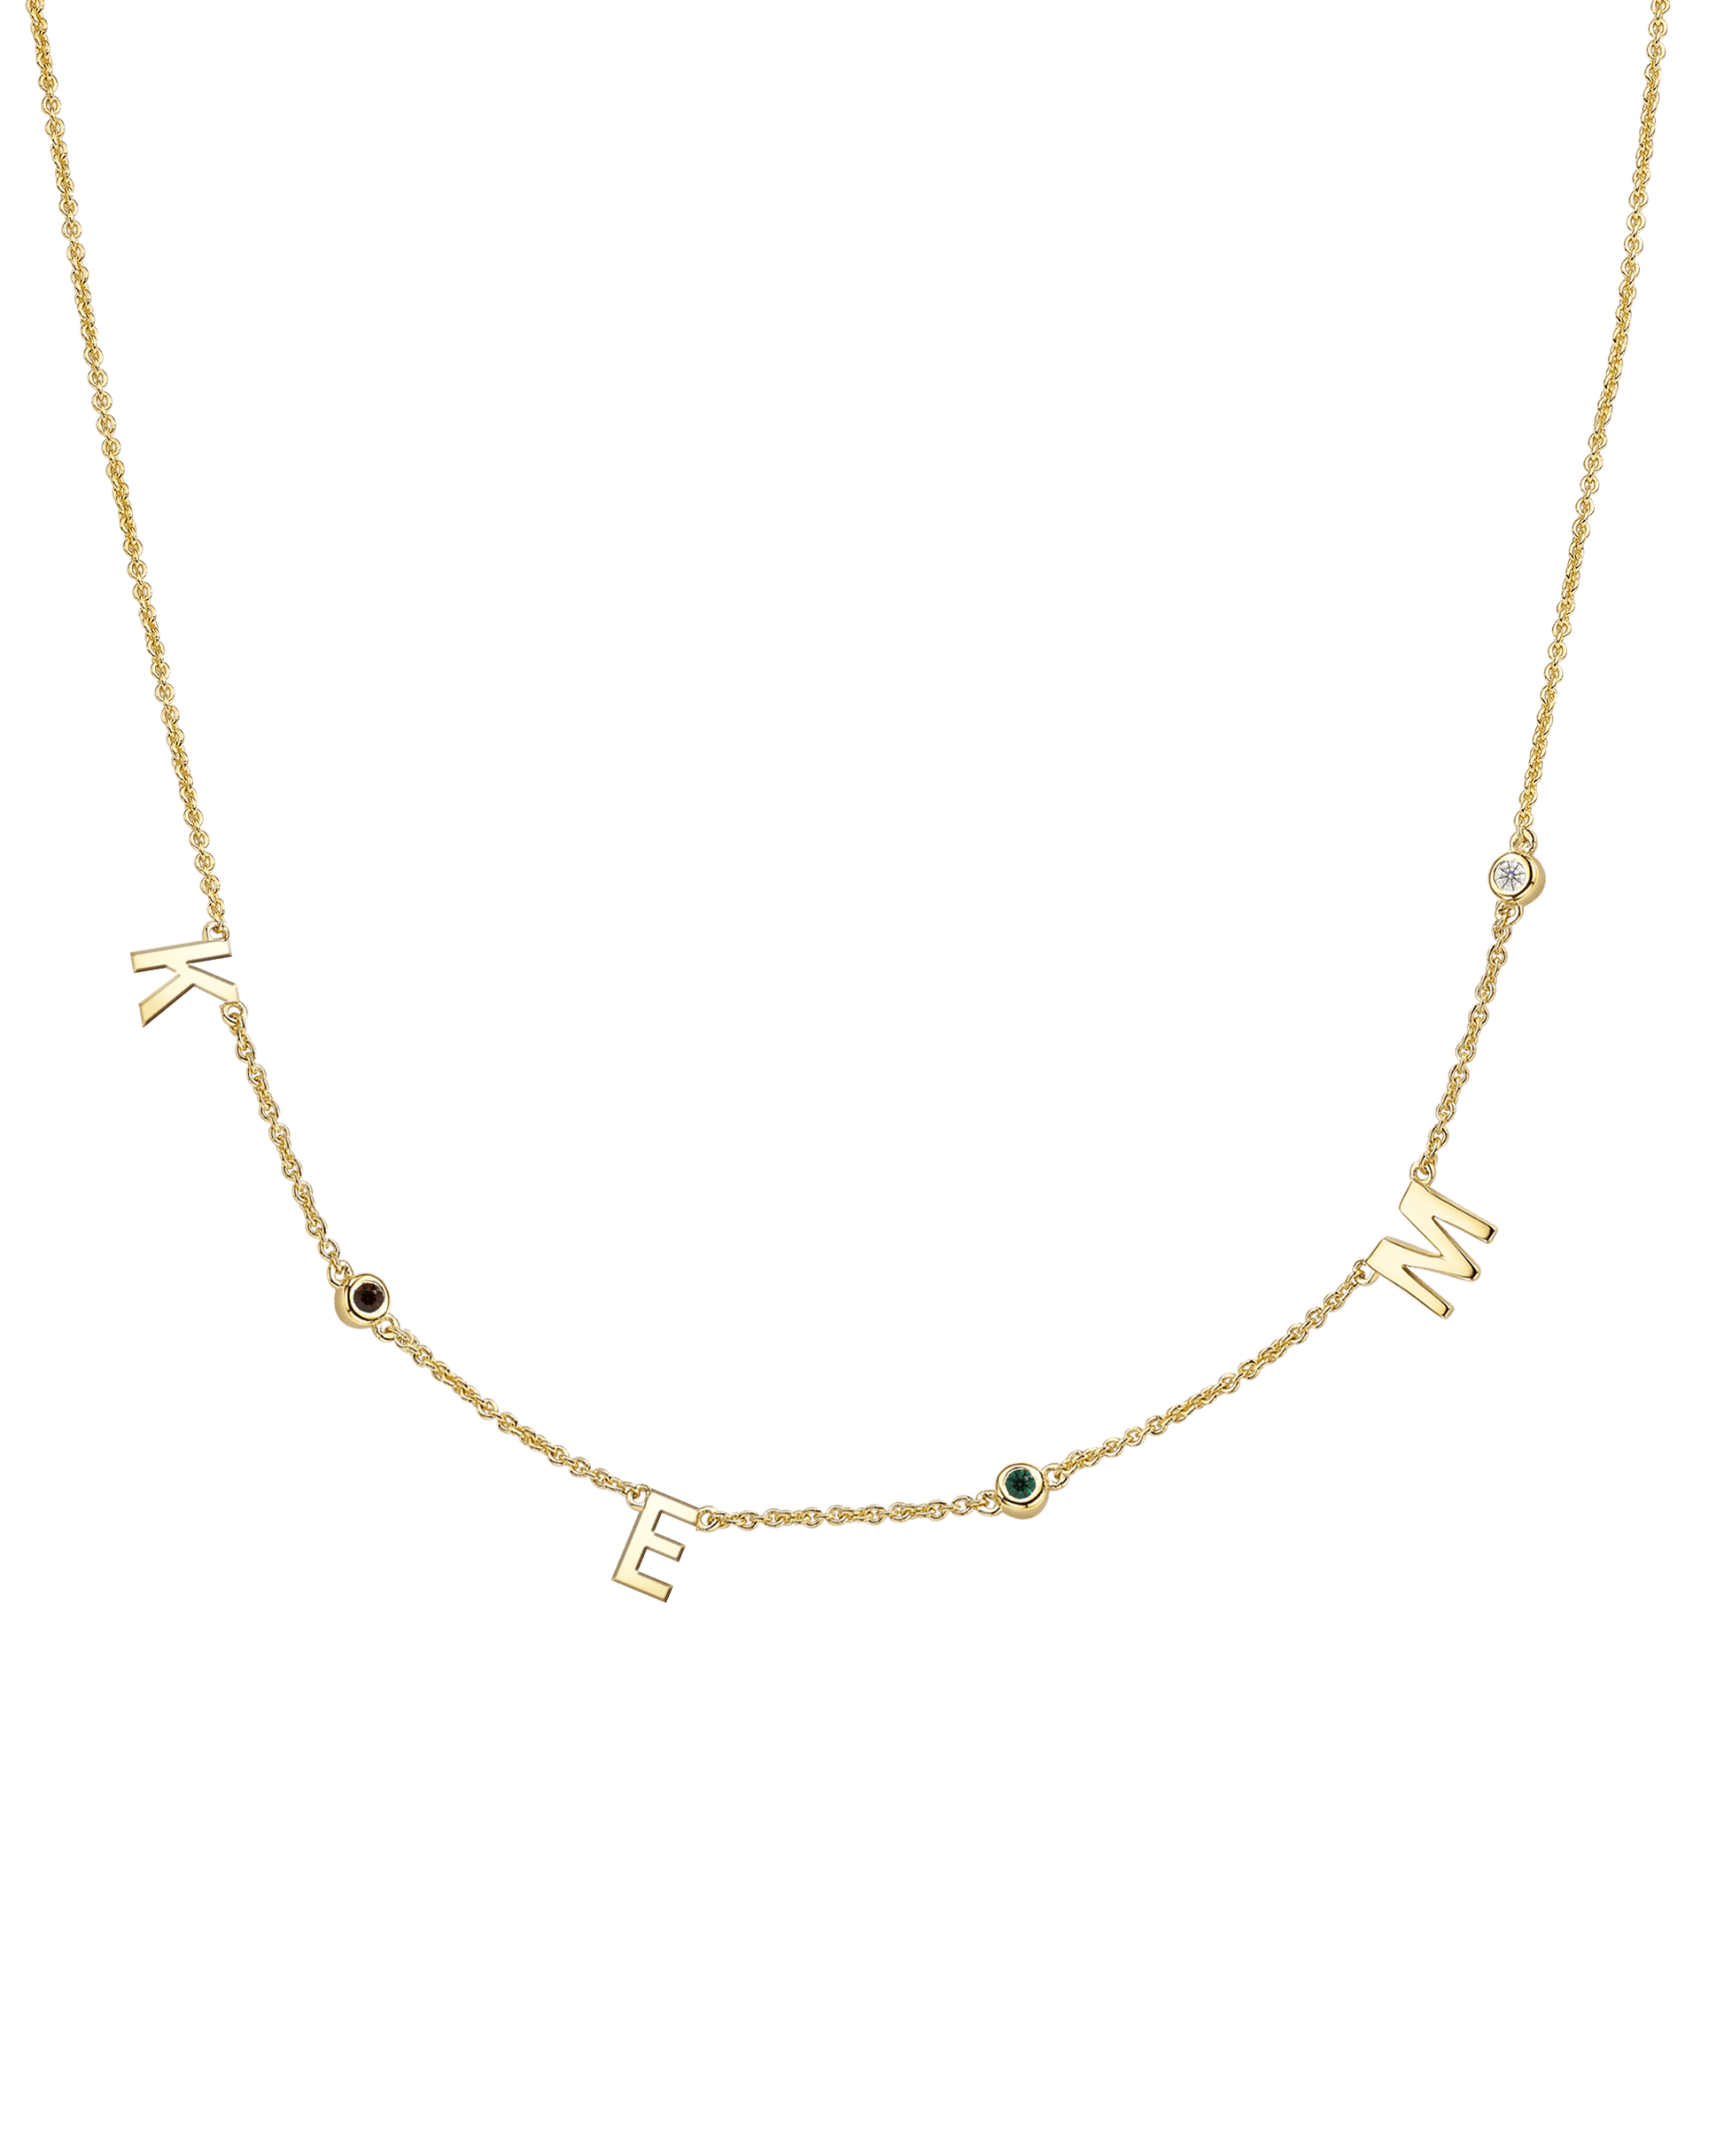 Initial Birthstone Necklace - 14K Yellow Gold Necklaces magal-dev 3 Initials + 3 Birthstones Adjustable 16-17" (40cm-43cm) 